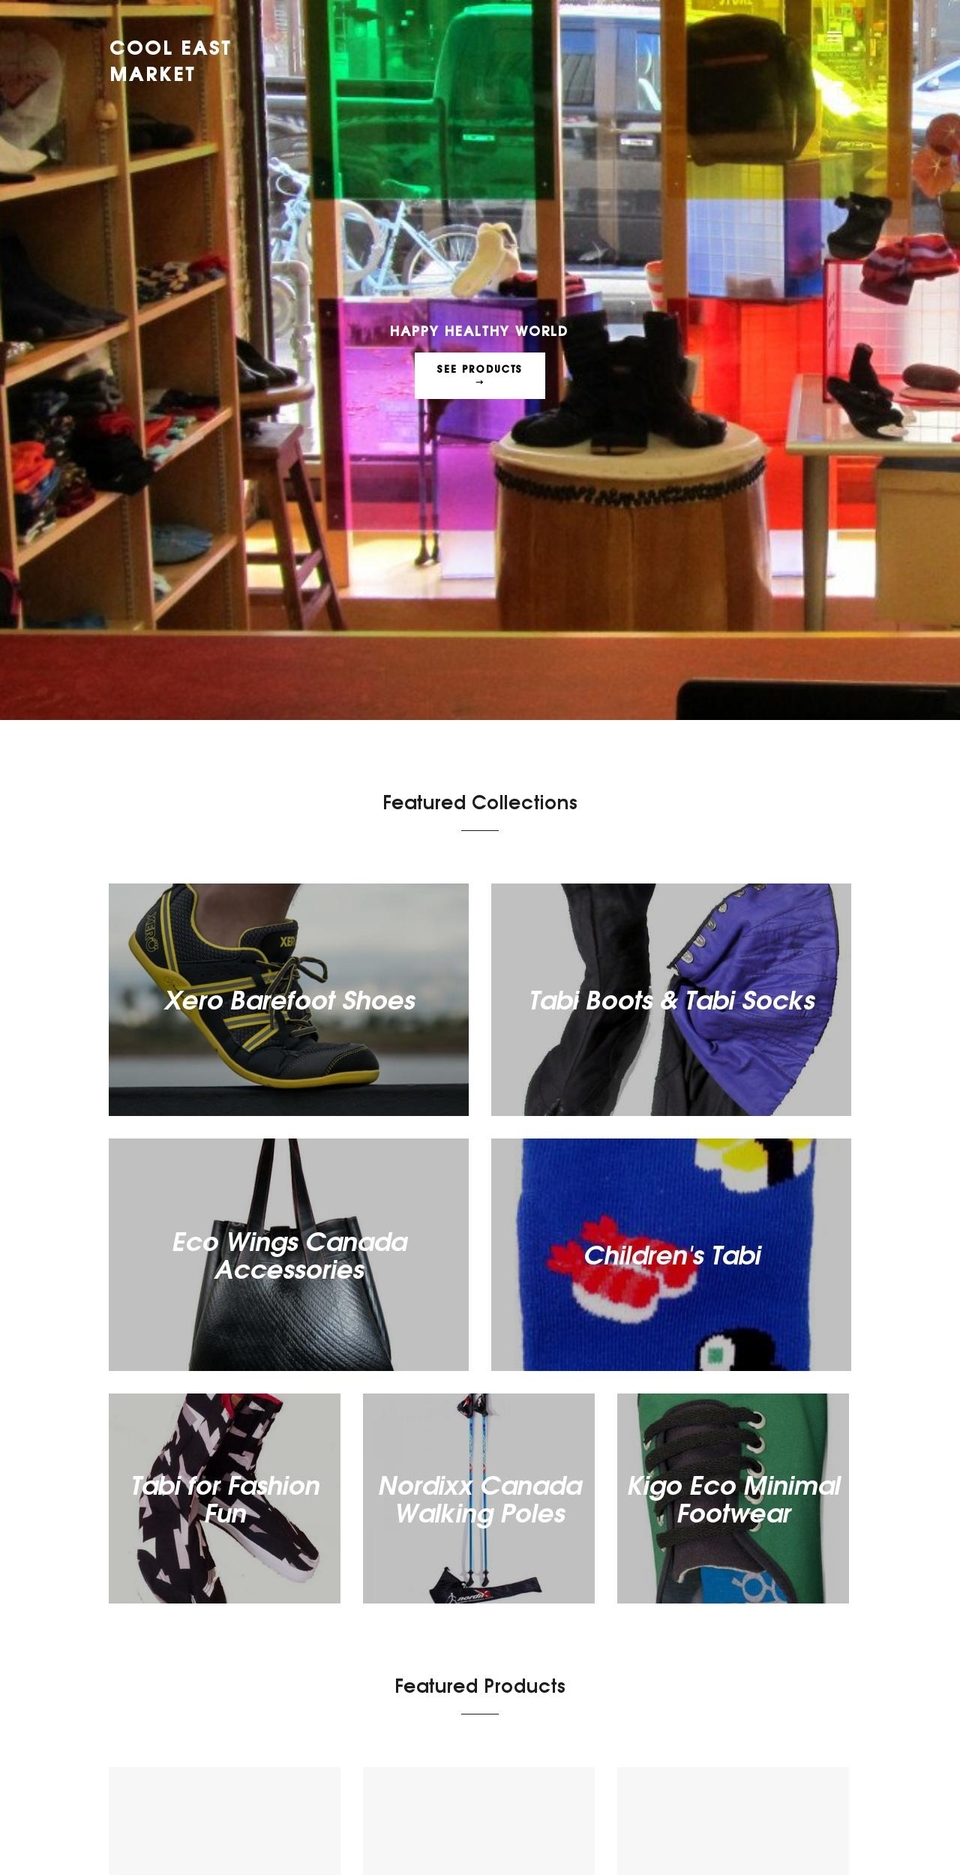 Galleria Shopify theme site example cooleastmarket.com